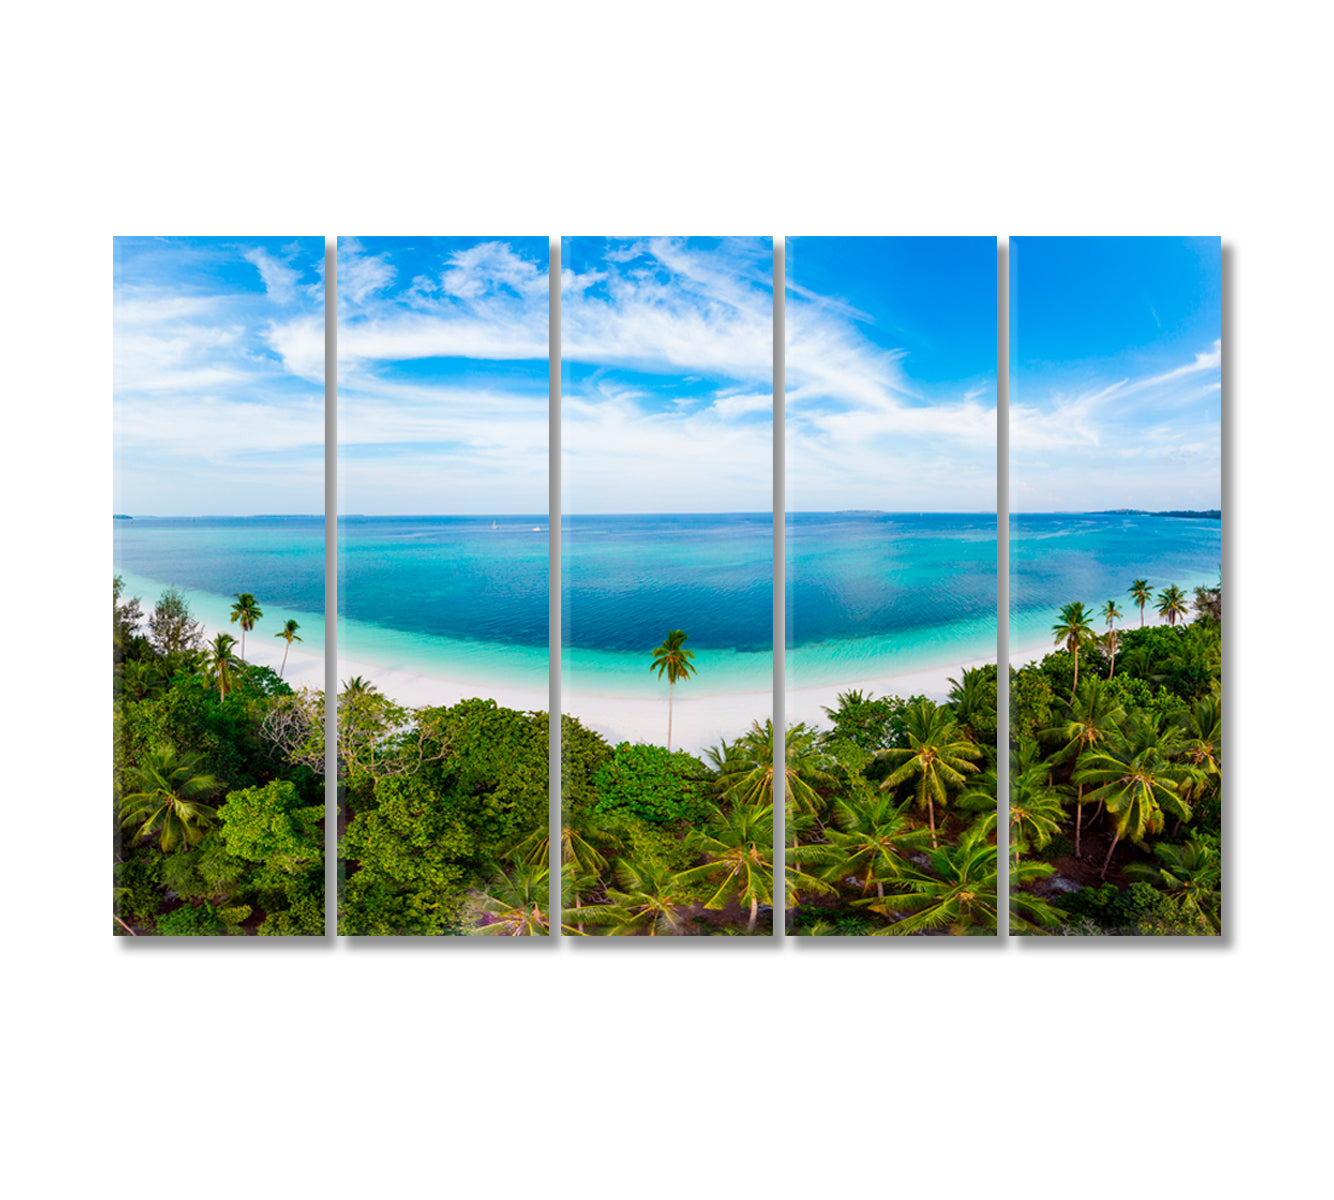 Tropical Beach with Palm Trees Indonesia Canvas Print-Canvas Print-CetArt-5 Panels-36x24 inches-CetArt